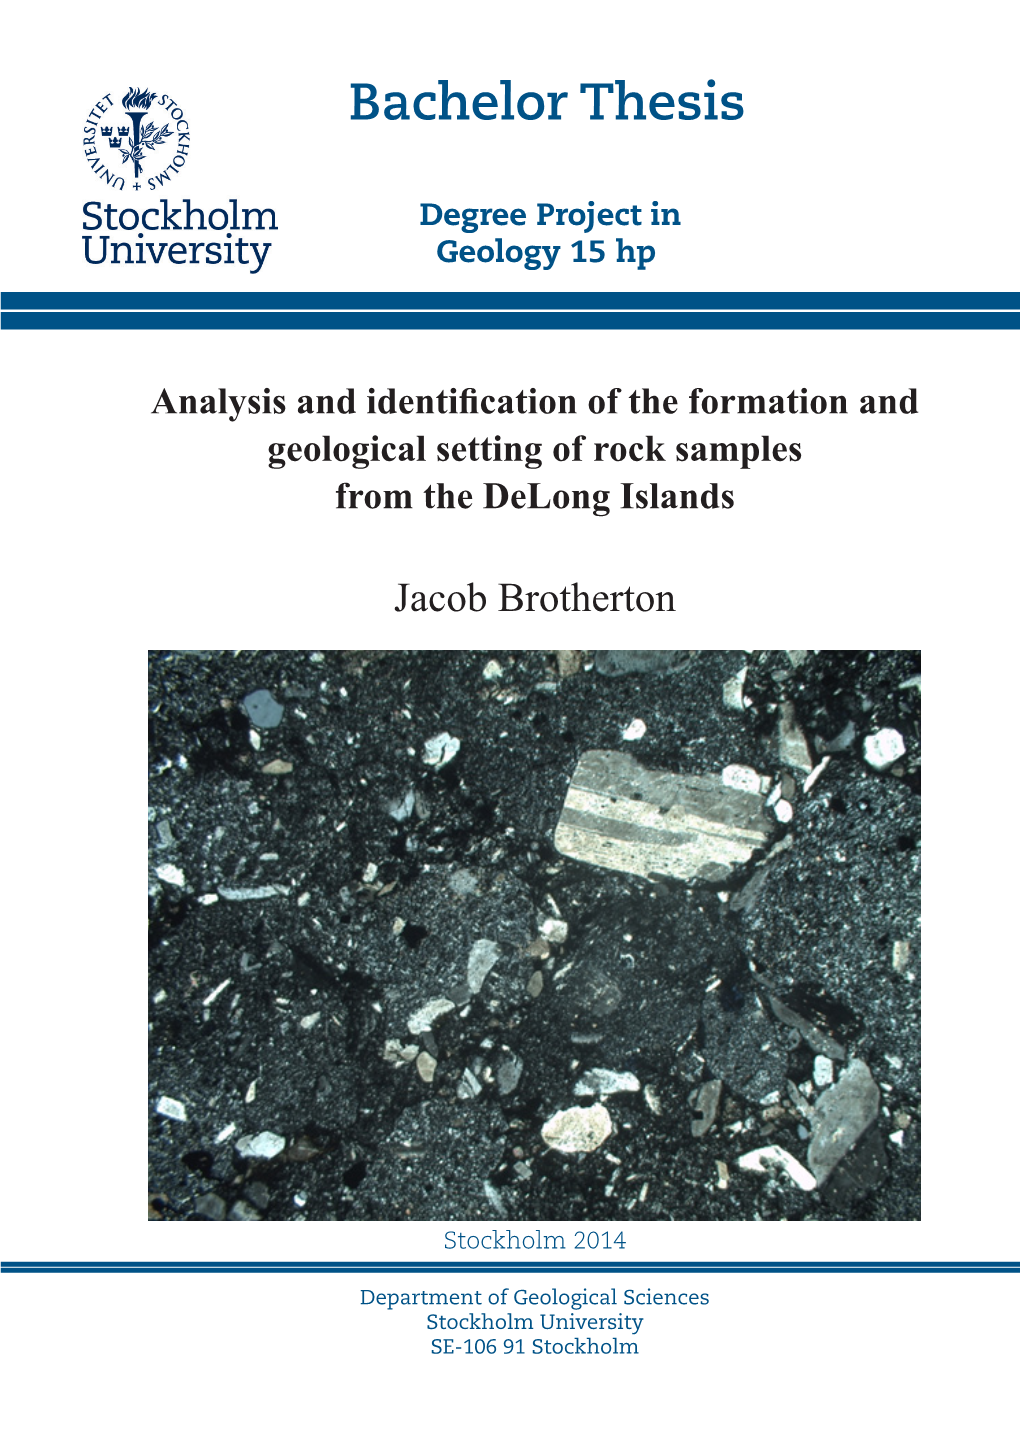 Analysis and Identification of the Formation and Geological Setting of Rock Samples from the Delong Islands